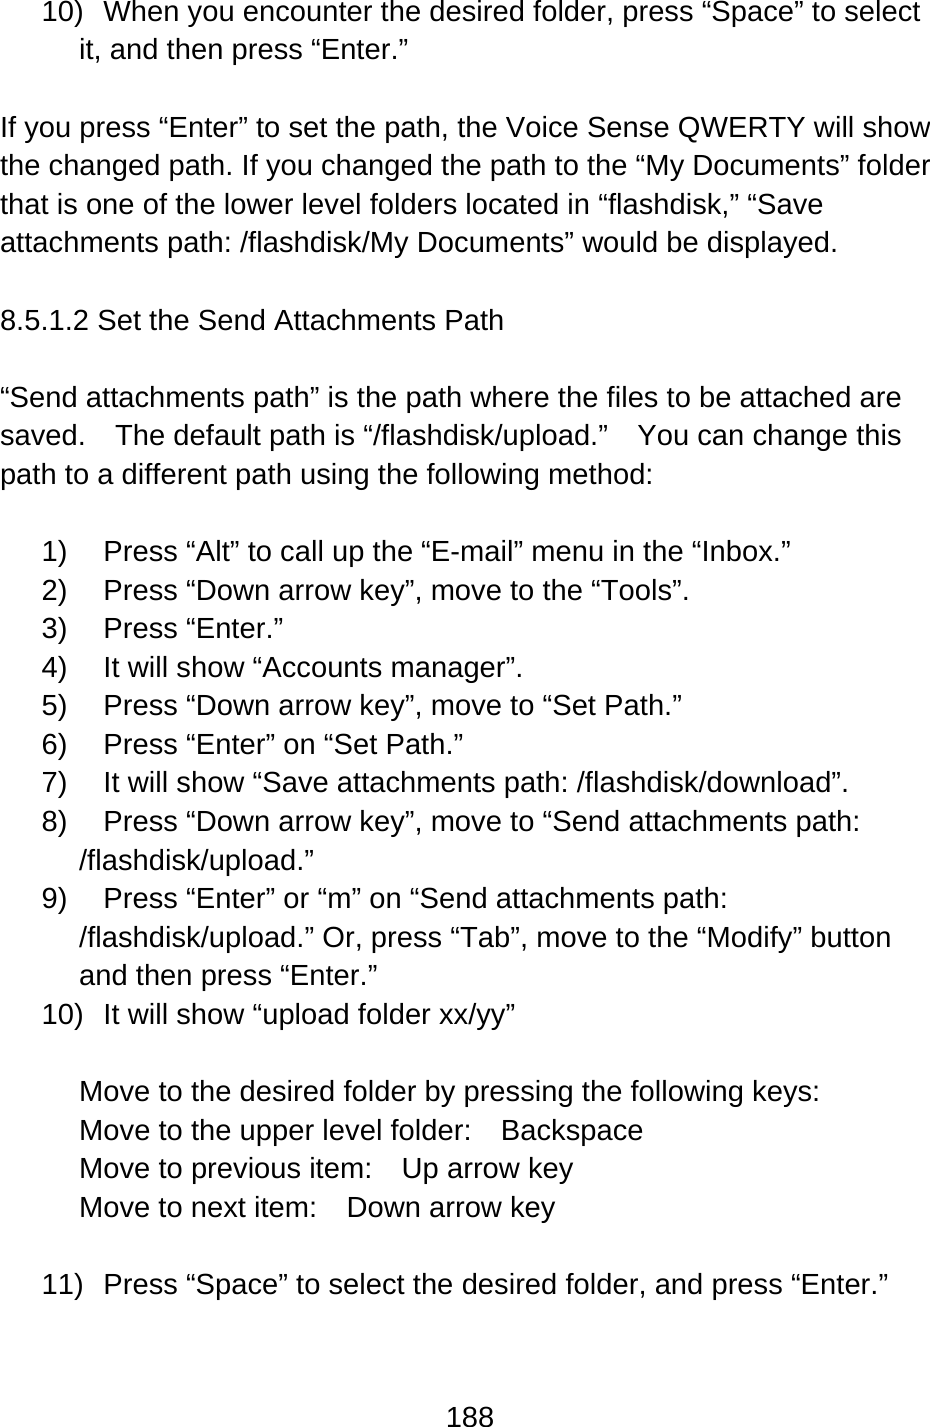 188  10)  When you encounter the desired folder, press “Space” to select it, and then press “Enter.”    If you press “Enter” to set the path, the Voice Sense QWERTY will show the changed path. If you changed the path to the “My Documents” folder that is one of the lower level folders located in “flashdisk,” “Save attachments path: /flashdisk/My Documents” would be displayed.  8.5.1.2 Set the Send Attachments Path  “Send attachments path” is the path where the files to be attached are saved.    The default path is “/flashdisk/upload.”    You can change this path to a different path using the following method:  1)  Press “Alt” to call up the “E-mail” menu in the “Inbox.” 2)  Press “Down arrow key”, move to the “Tools”. 3) Press “Enter.”  4)  It will show “Accounts manager”. 5)  Press “Down arrow key”, move to “Set Path.” 6)  Press “Enter” on “Set Path.”     7)  It will show “Save attachments path: /flashdisk/download”. 8)  Press “Down arrow key”, move to “Send attachments path: /flashdisk/upload.” 9)  Press “Enter” or “m” on “Send attachments path: /flashdisk/upload.” Or, press “Tab”, move to the “Modify” button and then press “Enter.” 10)  It will show “upload folder xx/yy”    Move to the desired folder by pressing the following keys: Move to the upper level folder:  Backspace Move to previous item:    Up arrow key Move to next item:    Down arrow key  11)  Press “Space” to select the desired folder, and press “Enter.”      